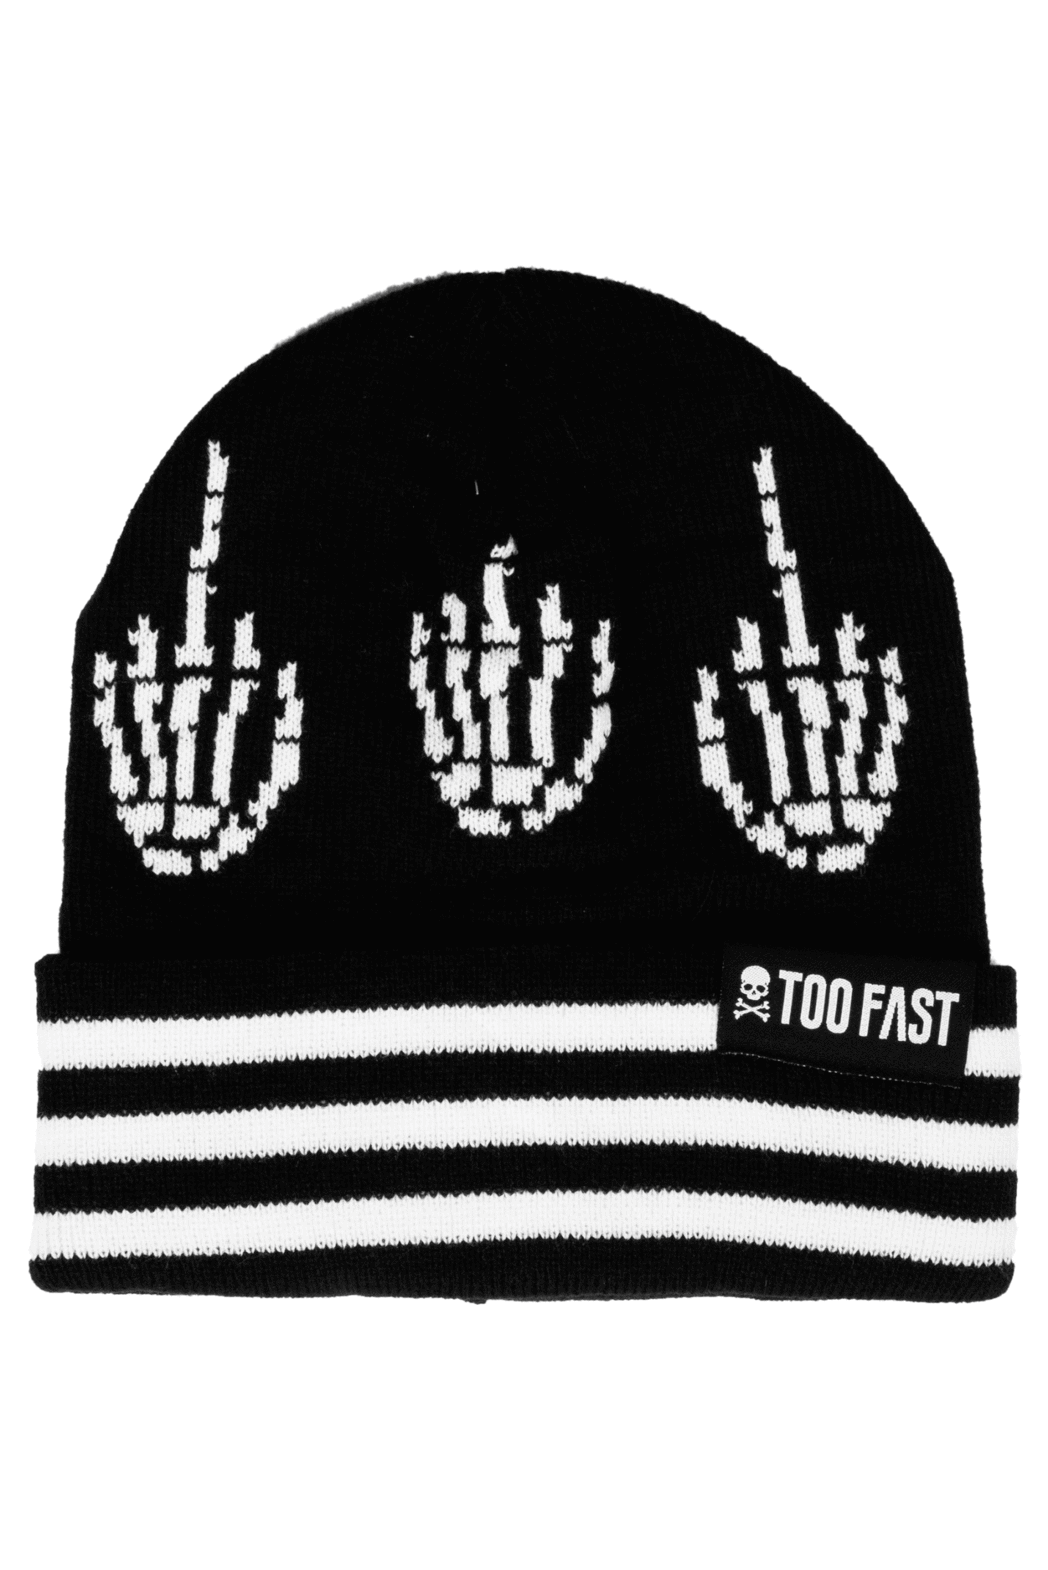 Up Yours Skeleton Middle Finger Knit Beanie